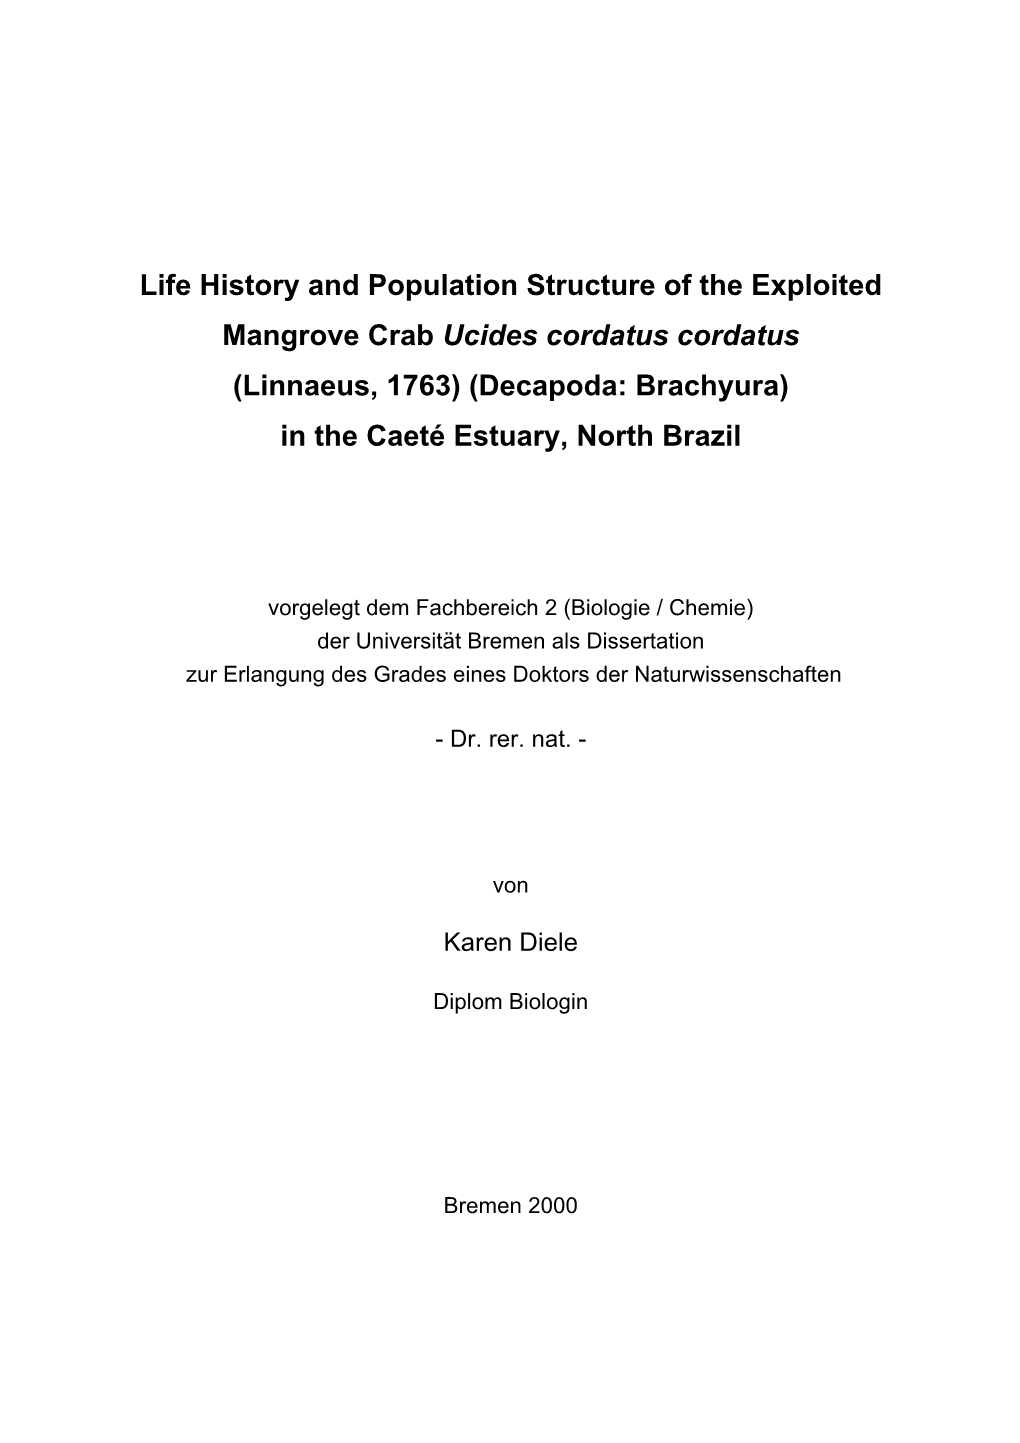 Life History and Population Structure of the Exploited Mangrove Crab